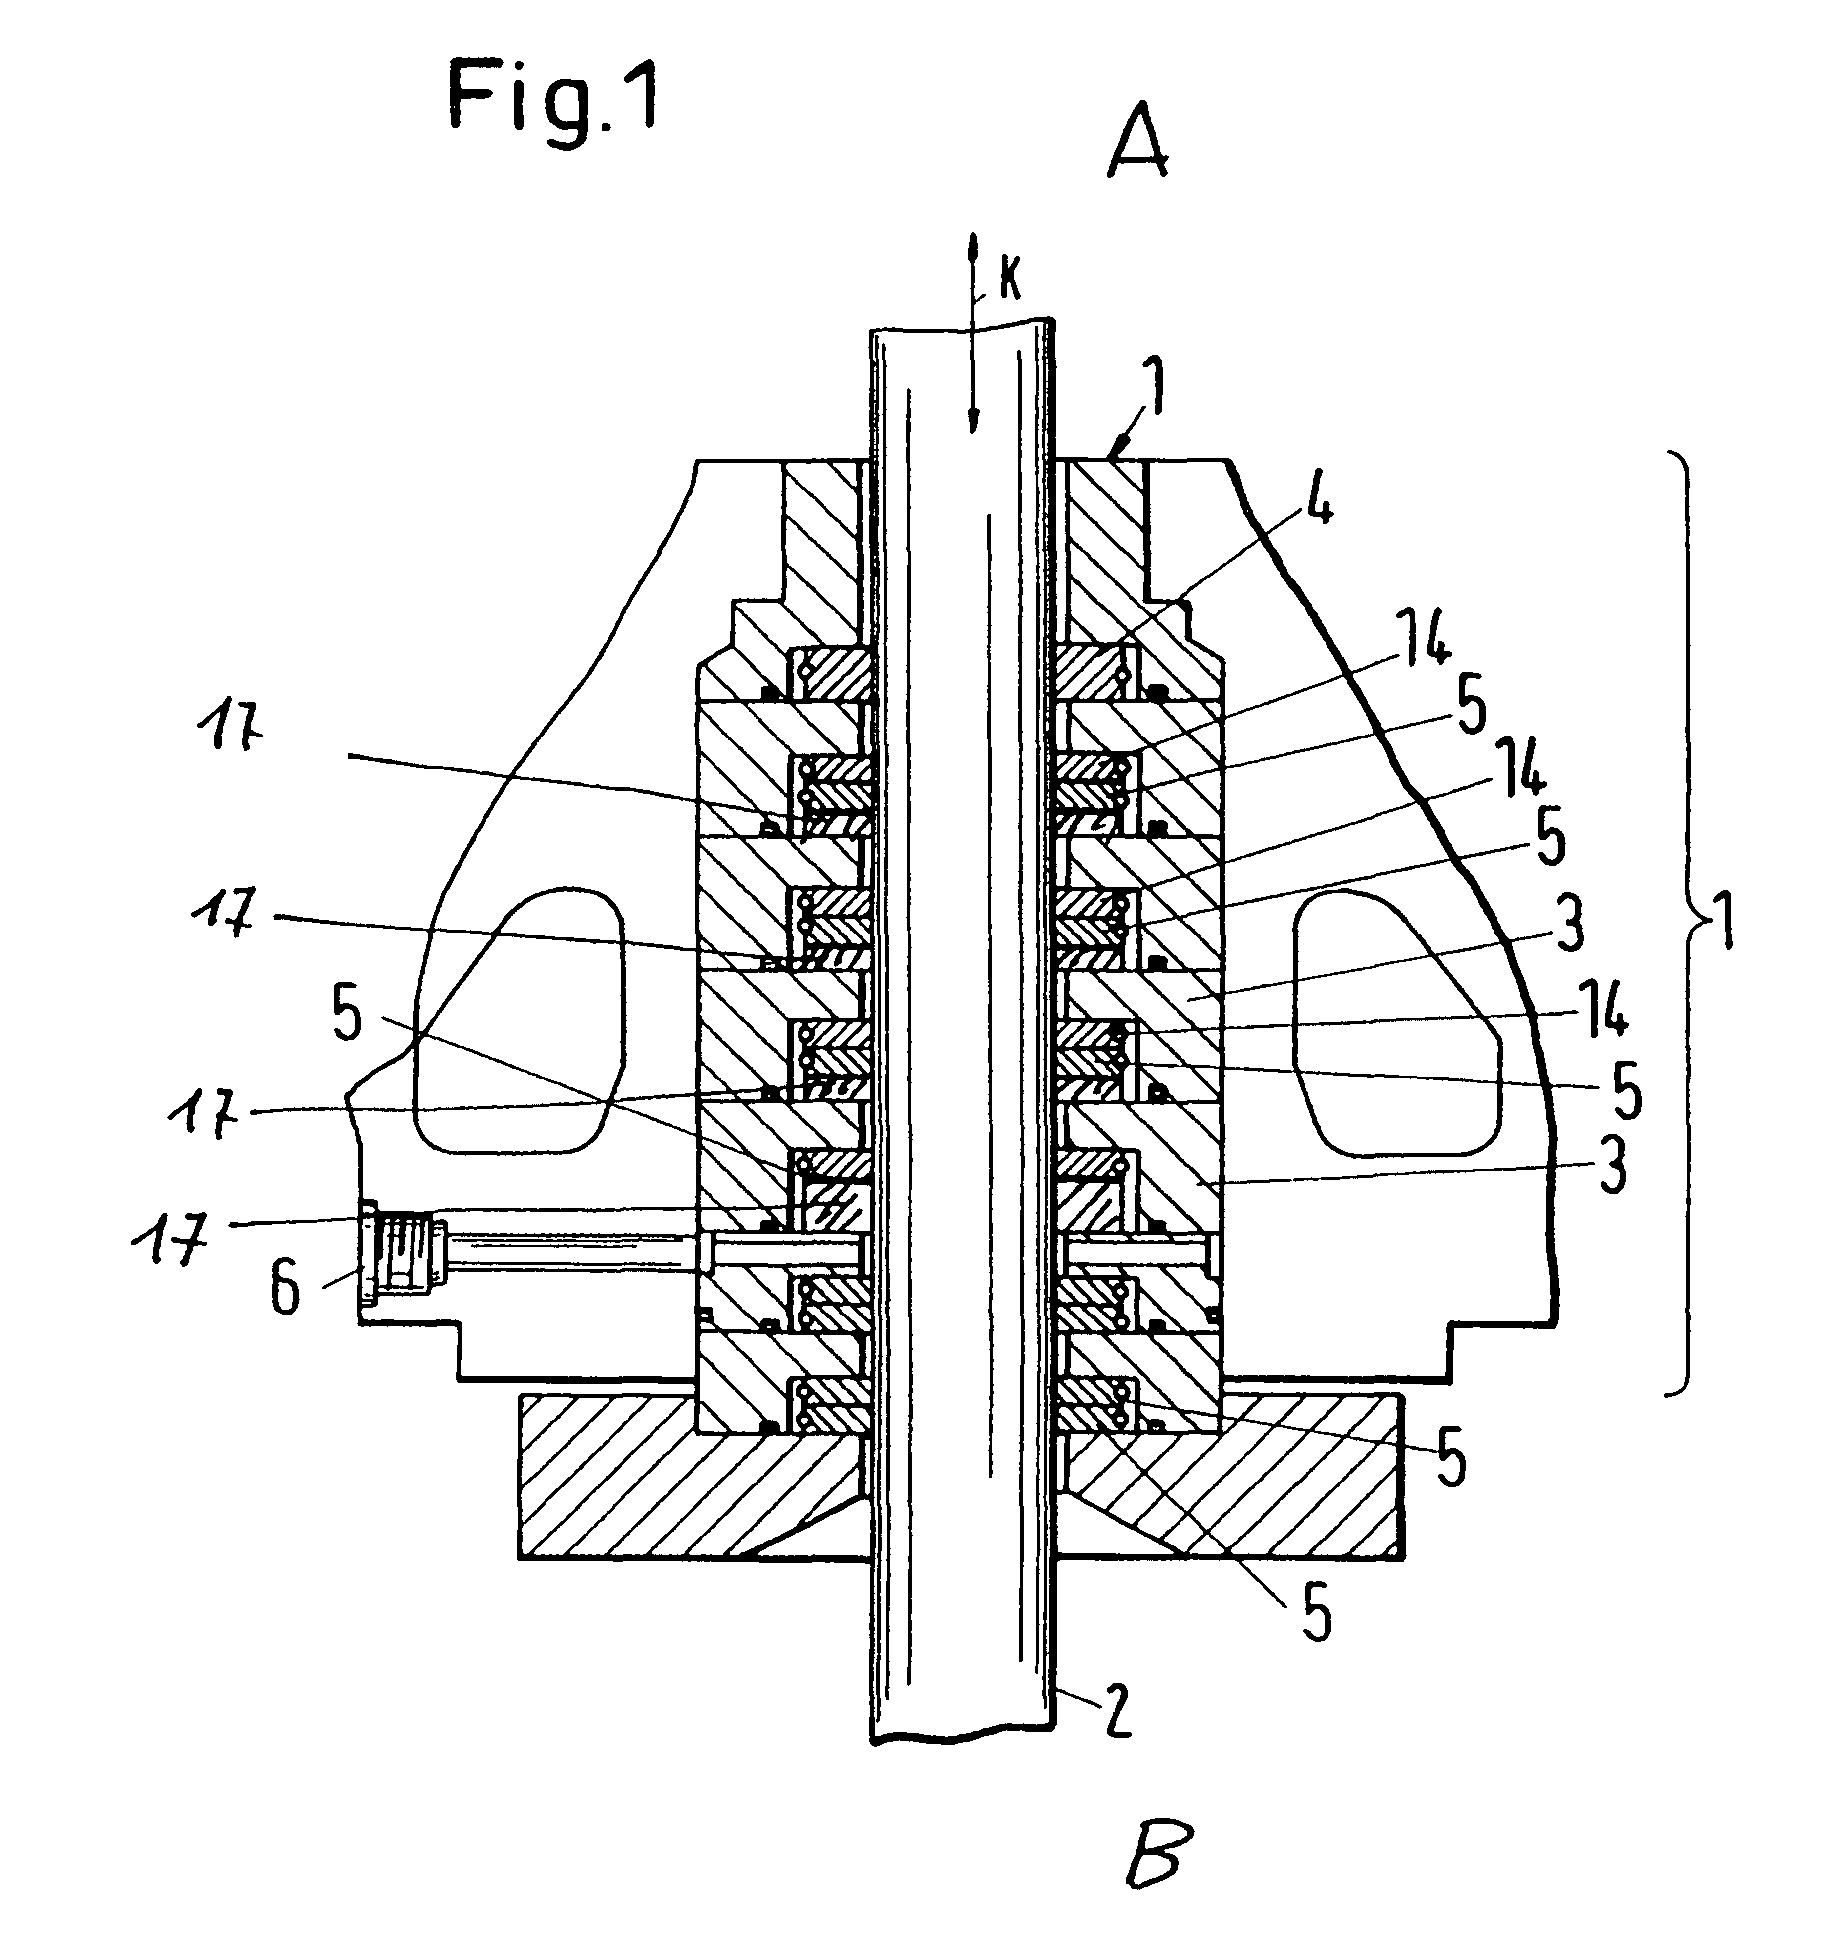 Dry-running piston rod sealing arrangement, and method for sealing a piston rod using one such arrangement